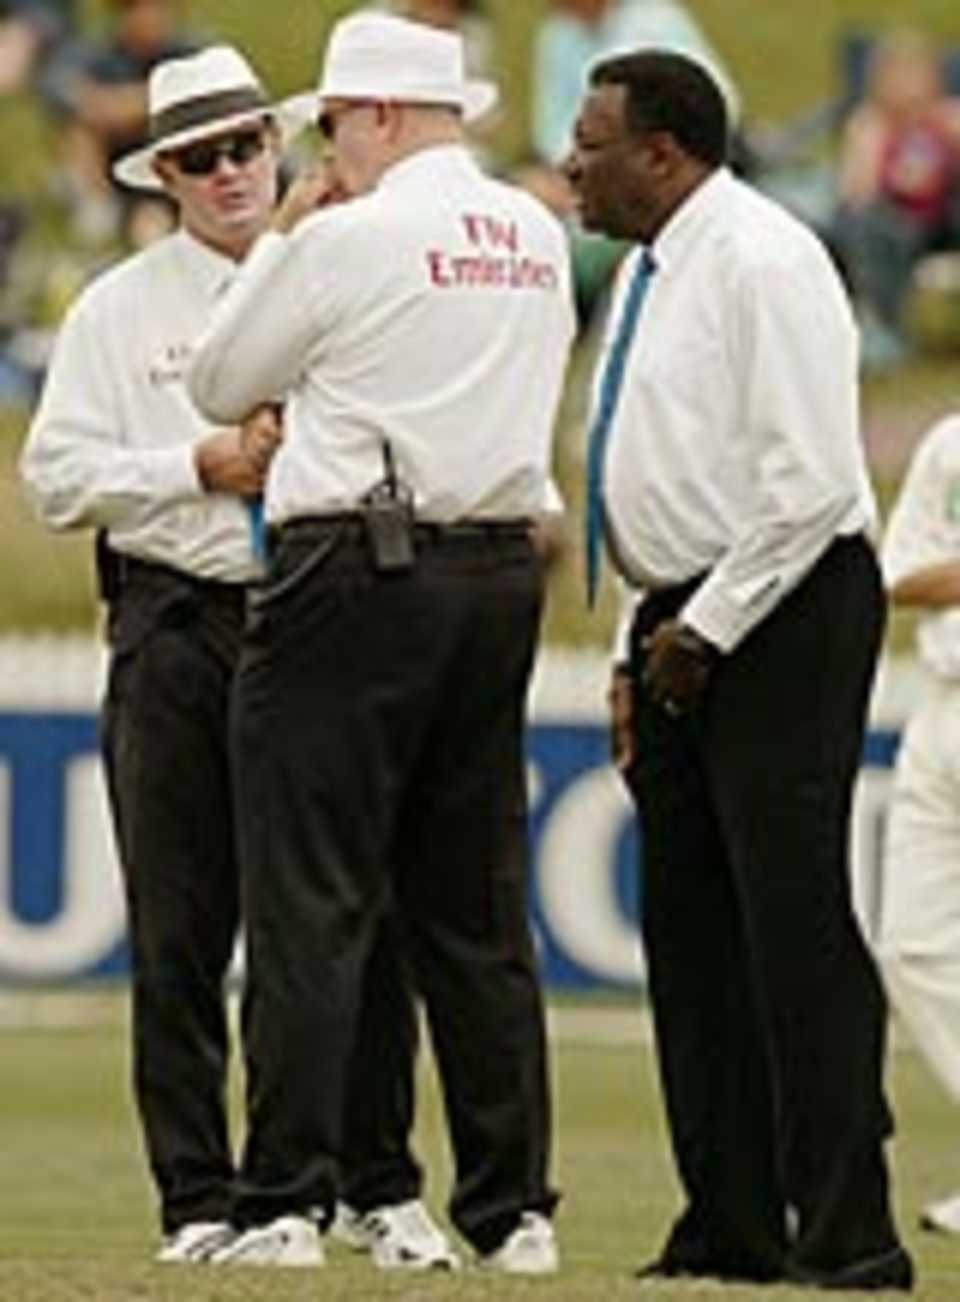 Clive Lloyd discusses the state of the pitch with umpires Russel Tiffin and Steve Davis, New Zealand v South Africa, 1st Test, Hamilton, 5th day, March 14, 2004